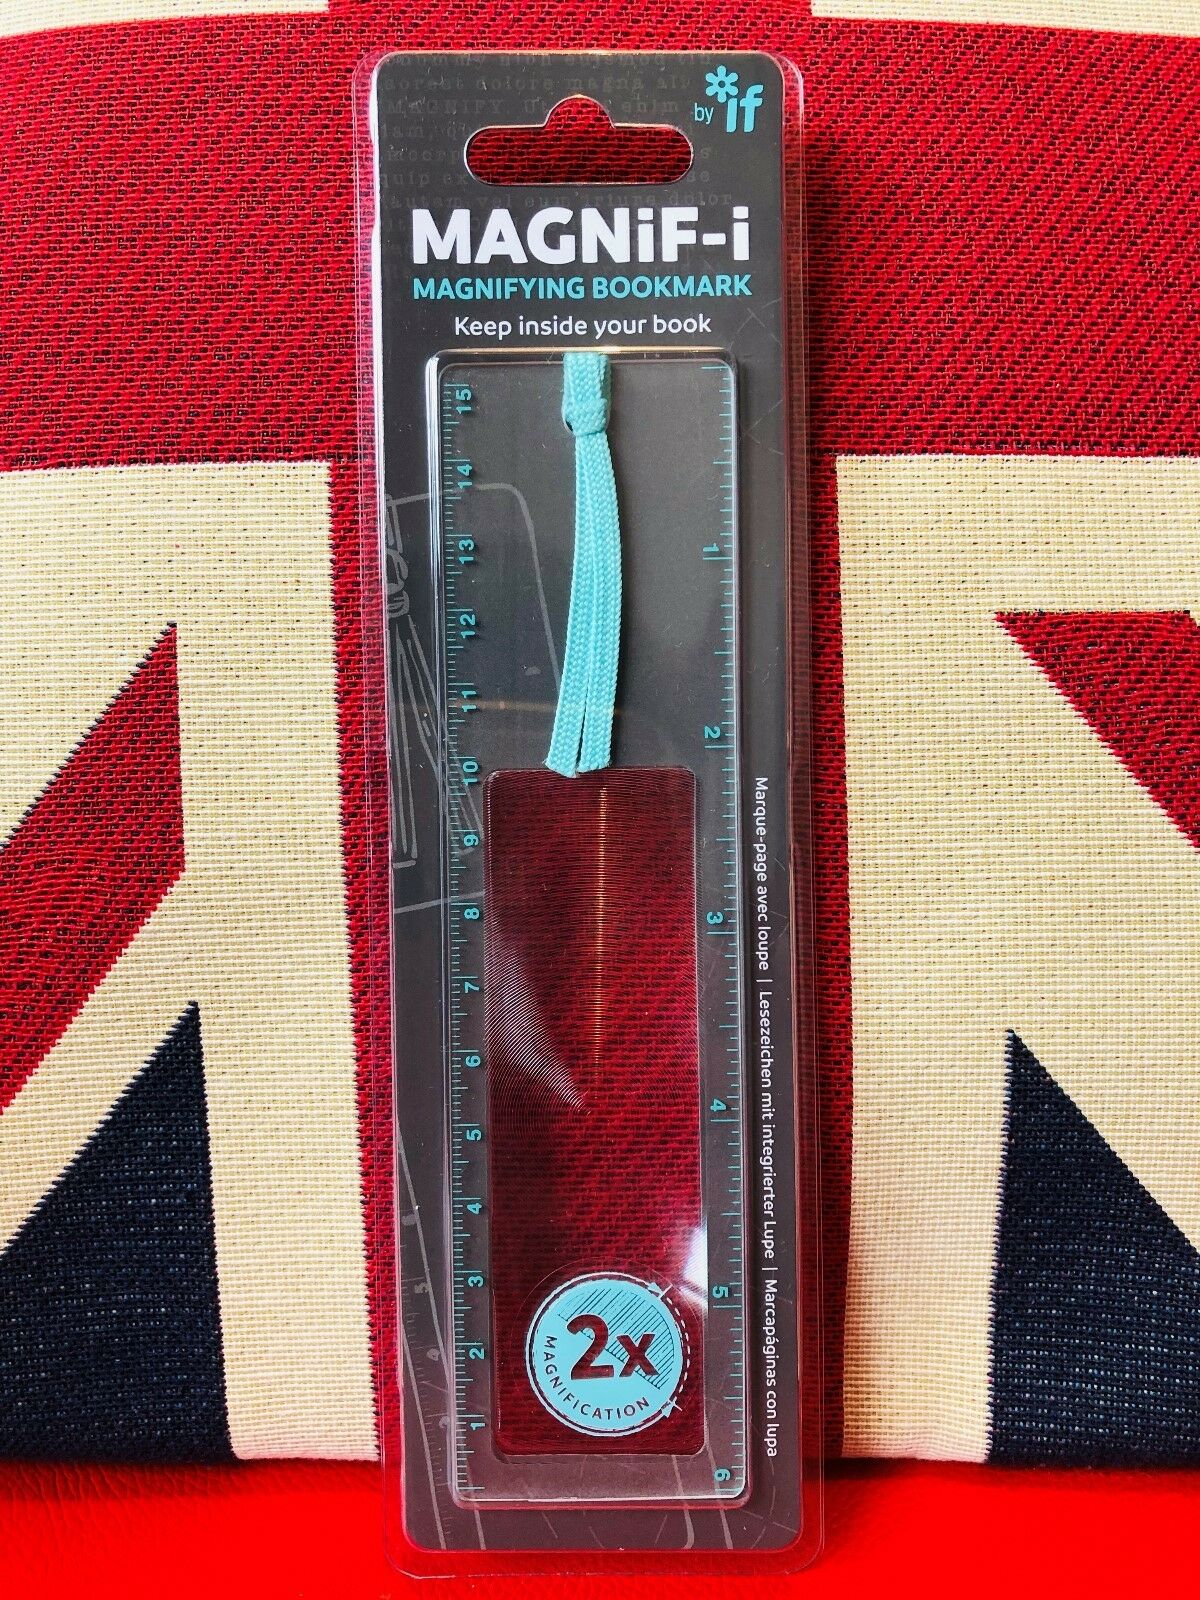 Rigla - Magnif-i - Maginifying Bookmark | If (That Company Called)